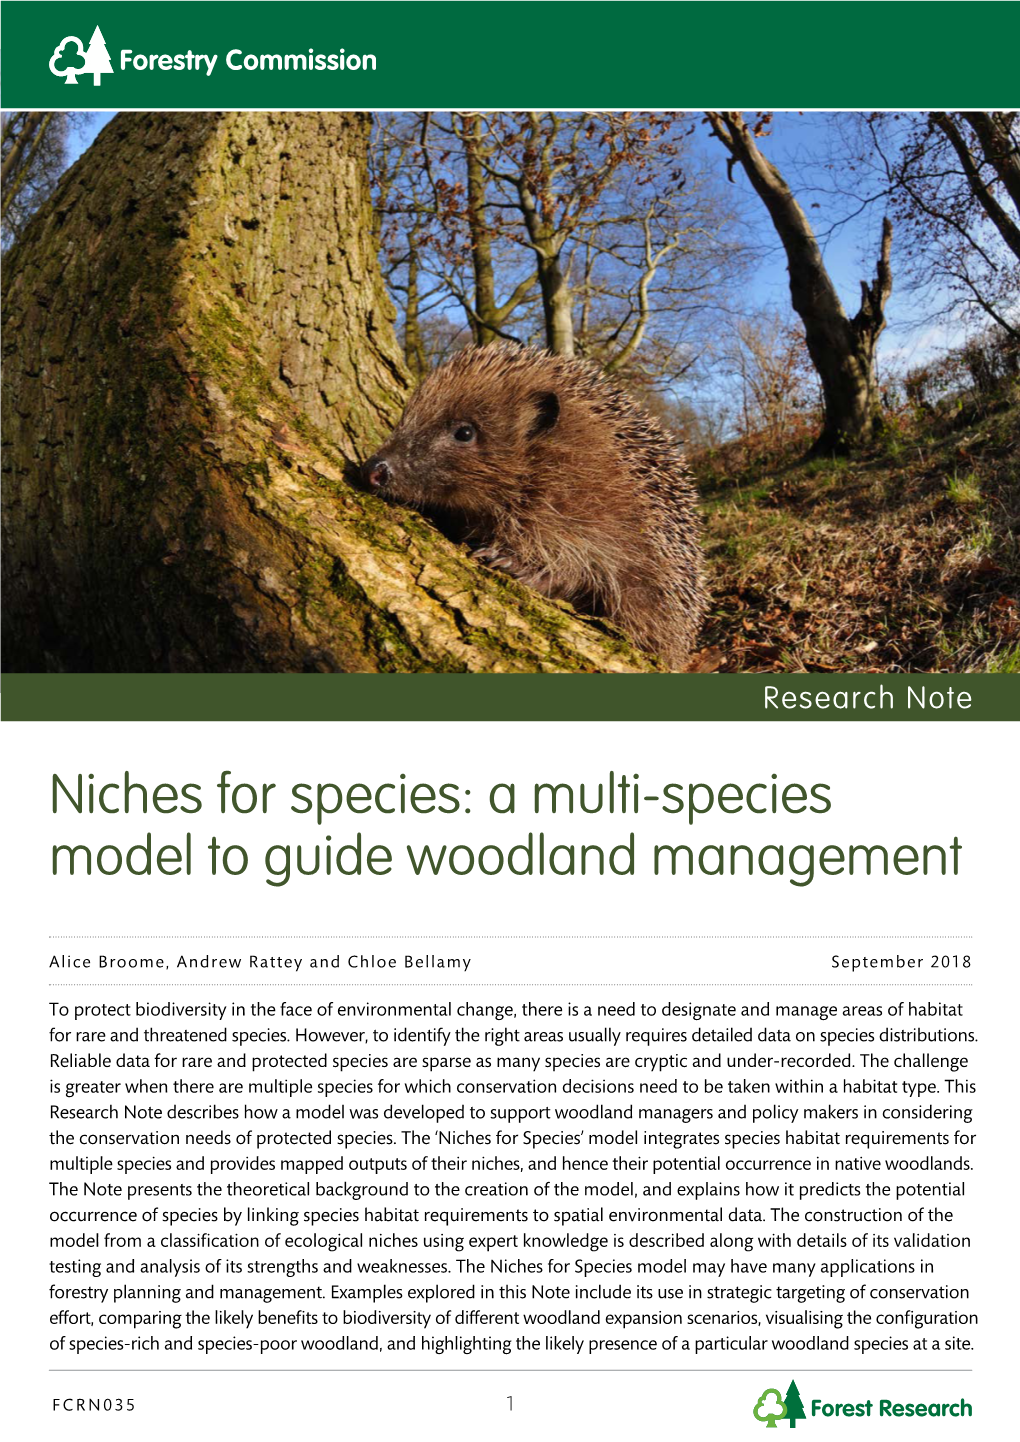 Niches for Species, a Multi-Species Model to Guide Woodland Management